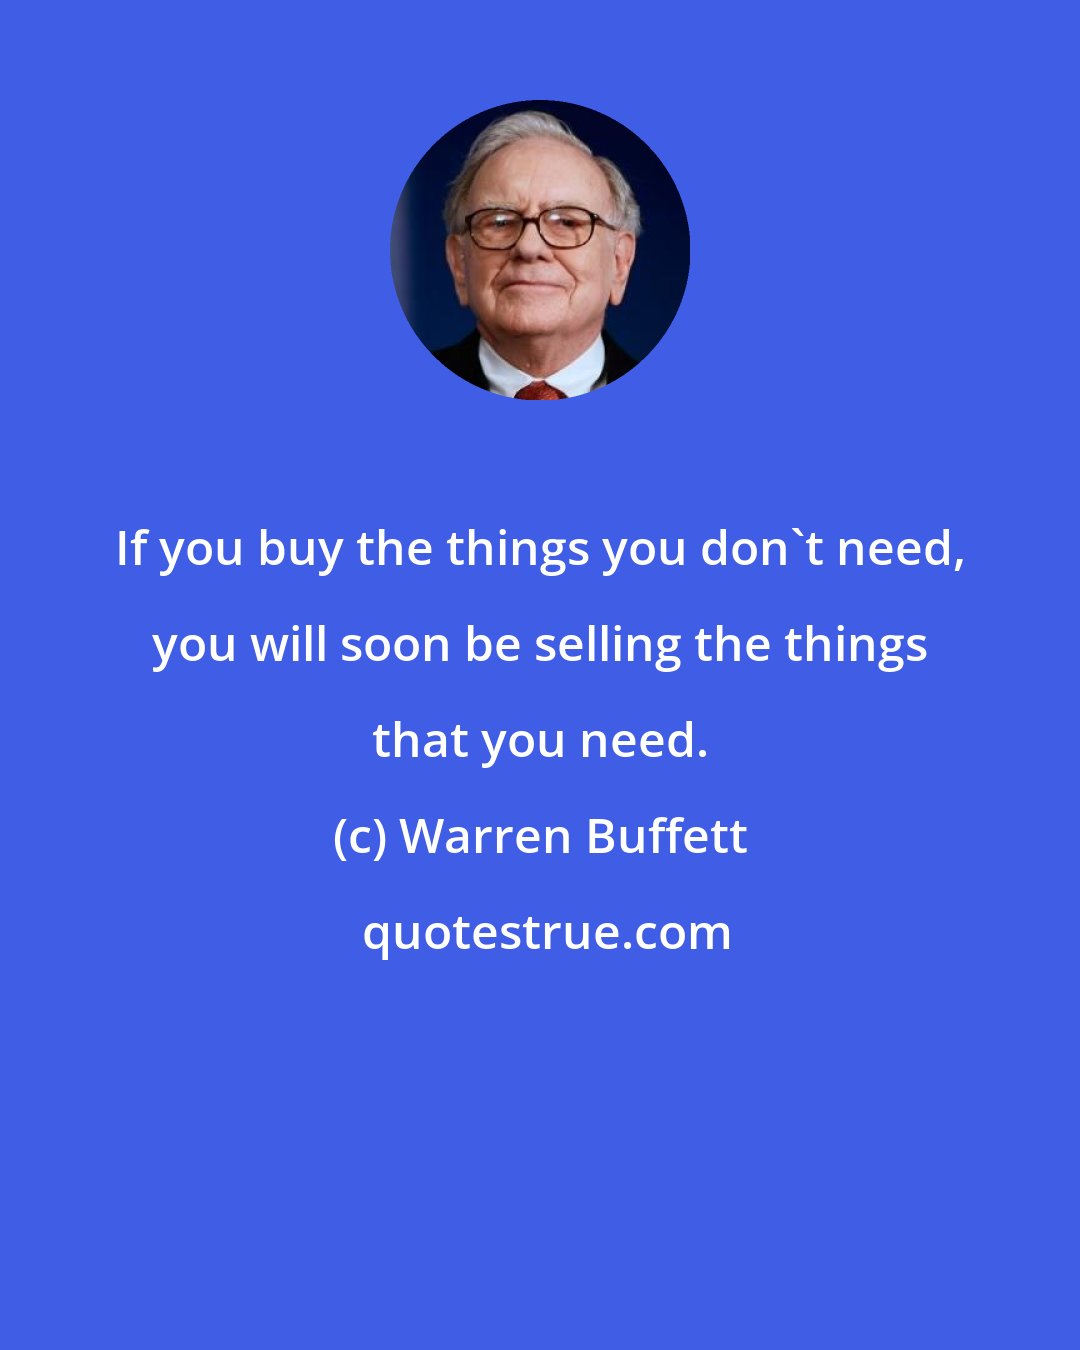 Warren Buffett: If you buy the things you don't need, you will soon be selling the things that you need.